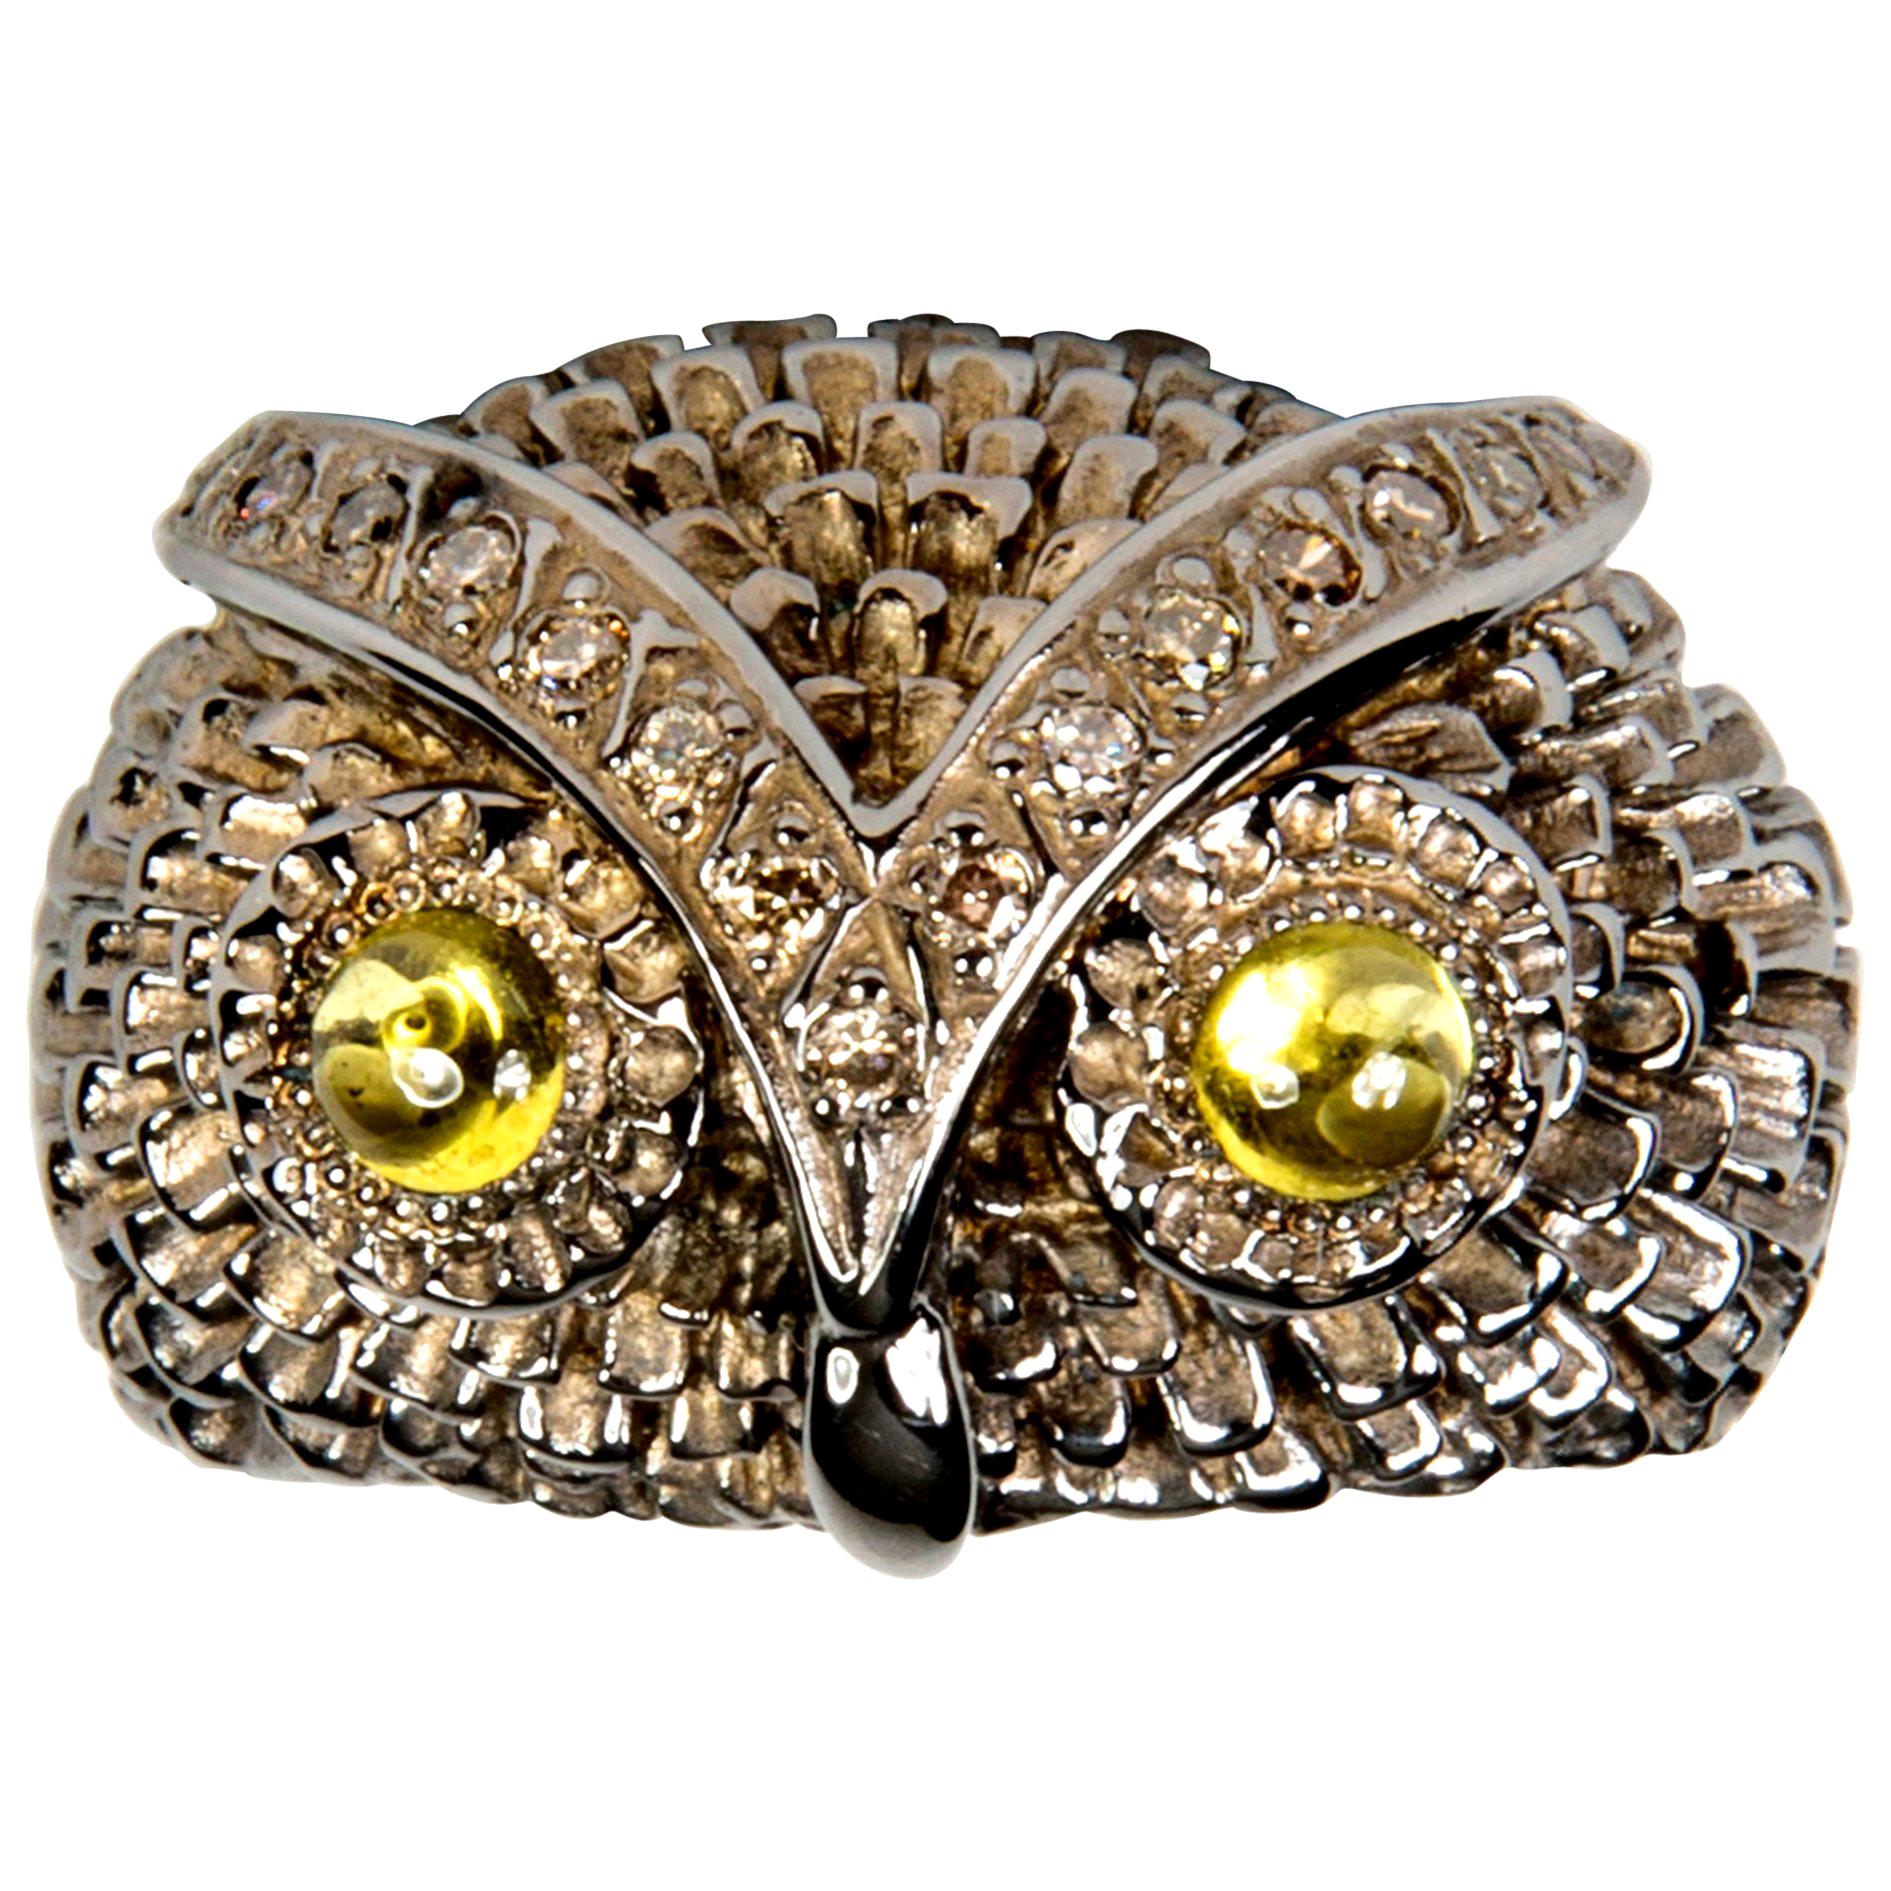 Unique handcrafted ring portraying this amazing owl (925/silver) to match your dresses and personality. The owl is known as the symbol of Athena - goddess of wisdom and strategy - as well as the guardian of Acropolis.  Its eyes are made of citrin